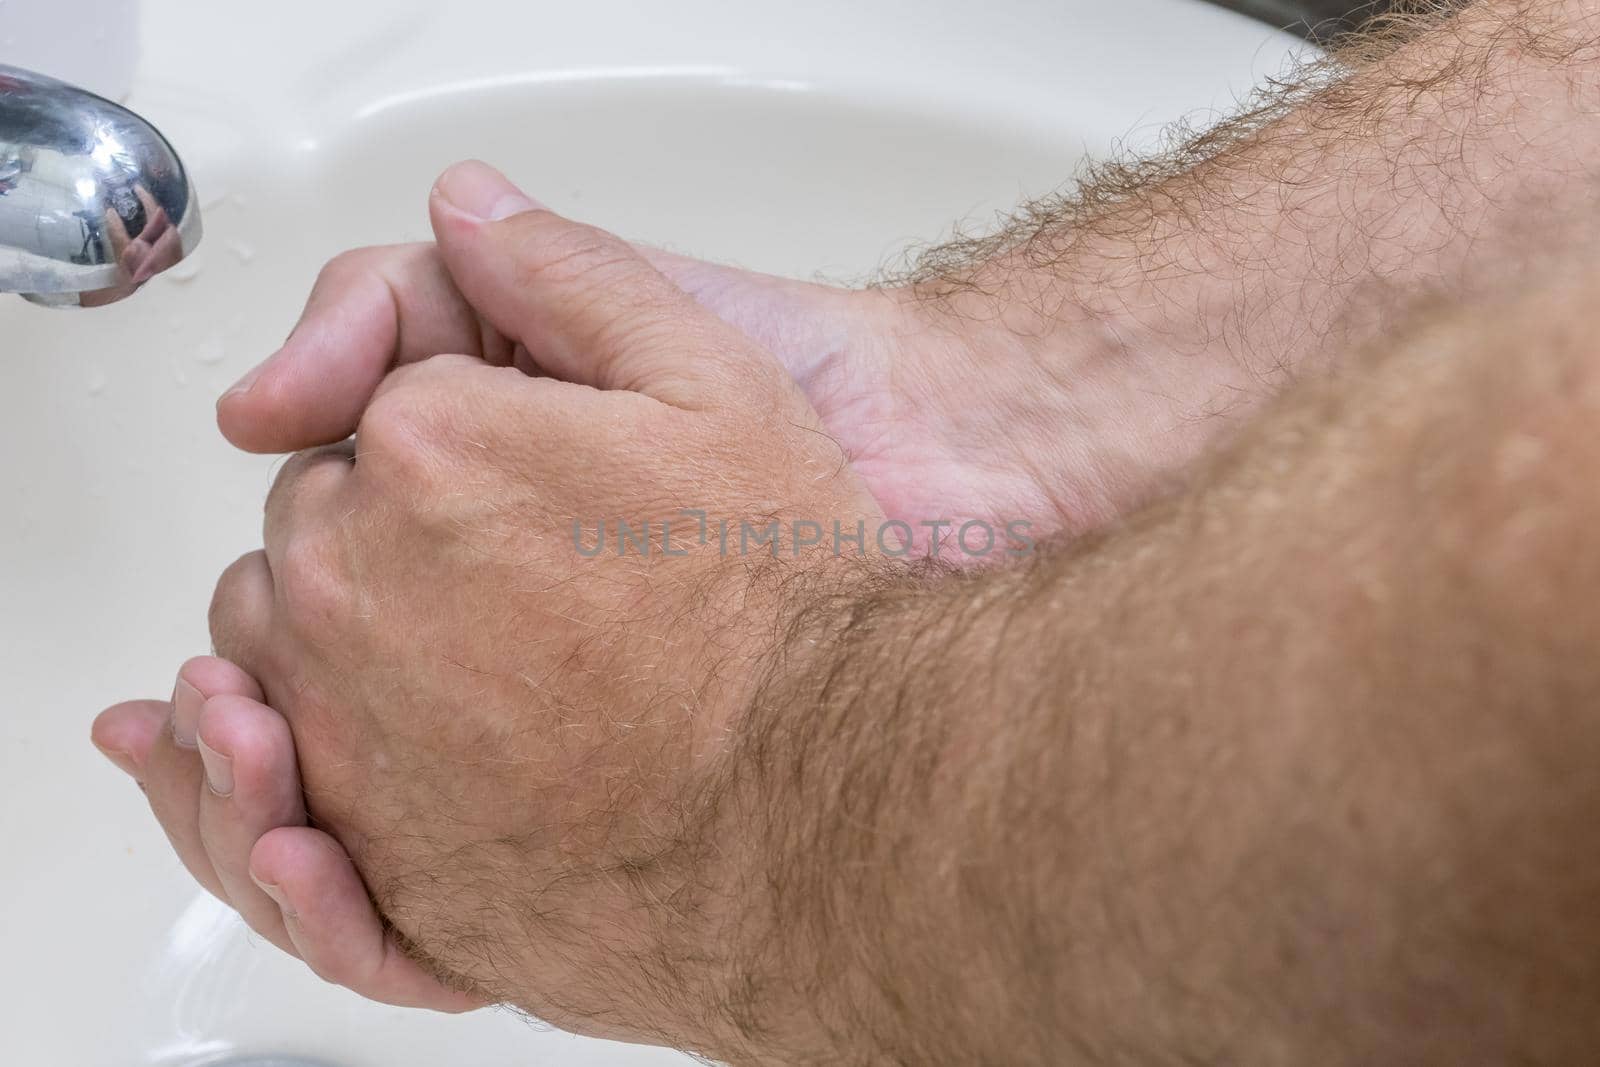 Man washing hands in basin close-up by imagesbykenny